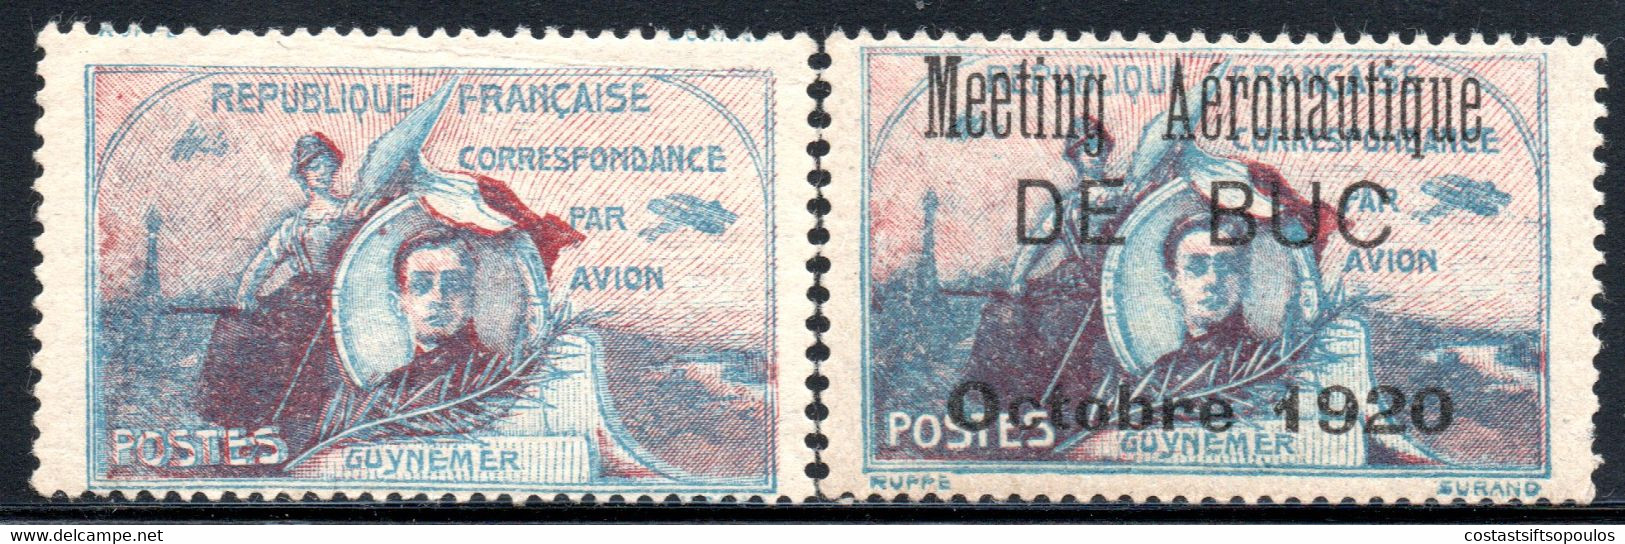 193.FRANCE.1920  GUYNEMER AND DE BUC AVIATION MEETING LABELS MNH - Aviation